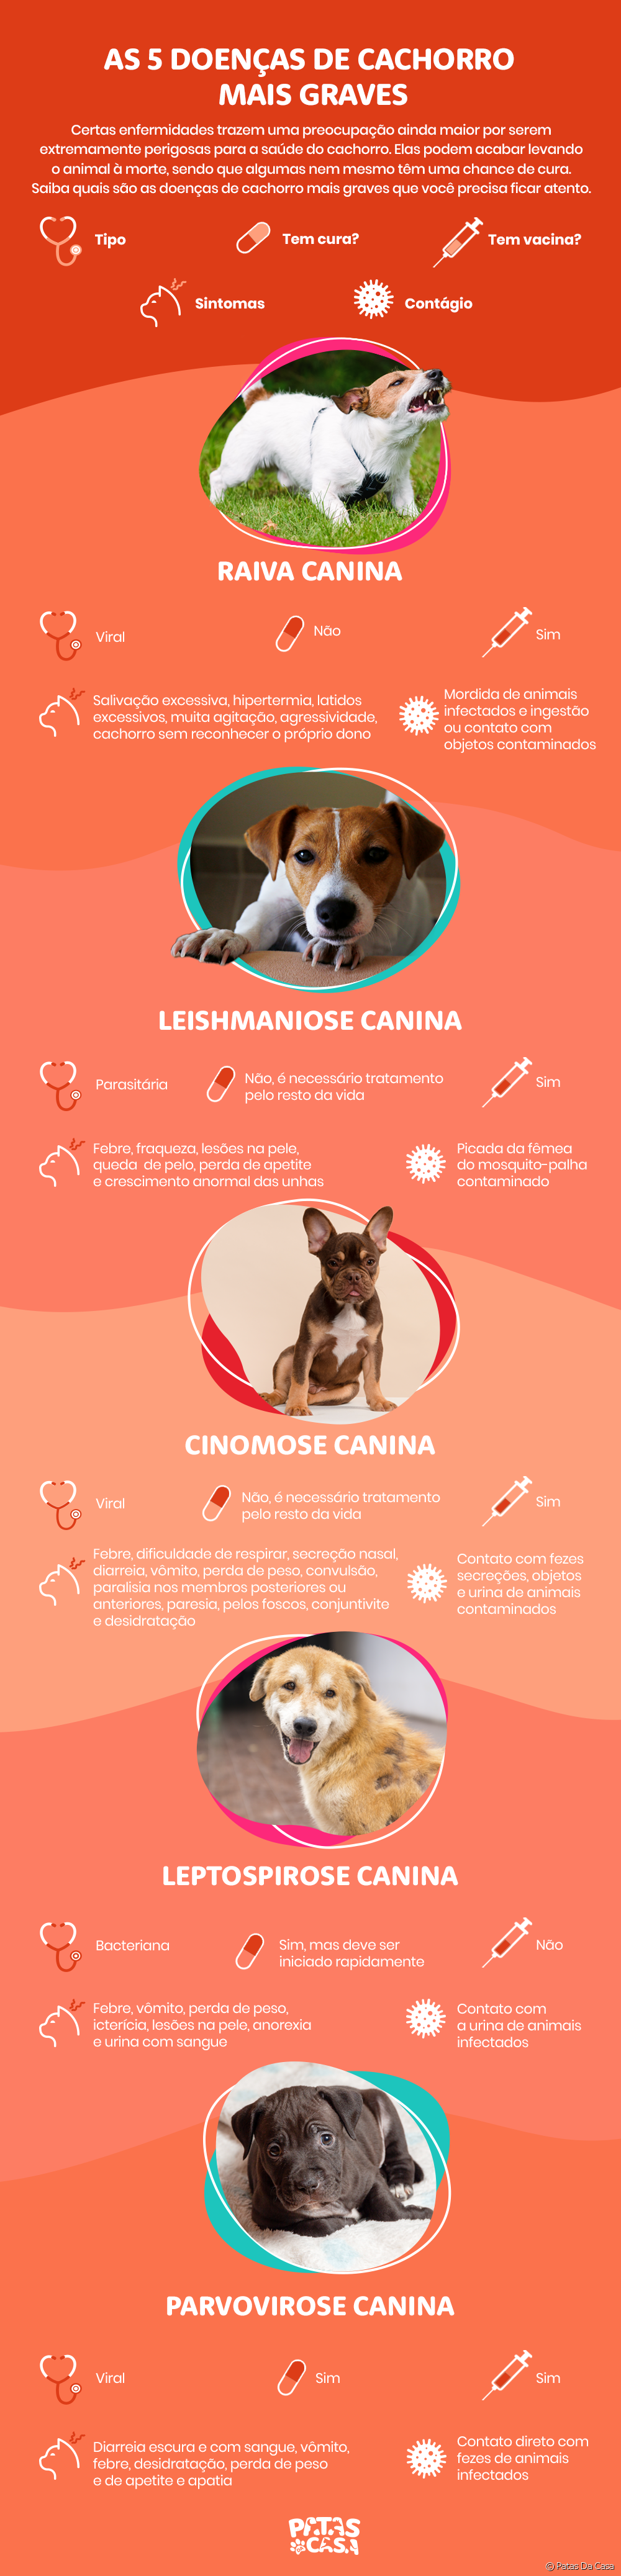  See the most serious dog diseases in an infographic